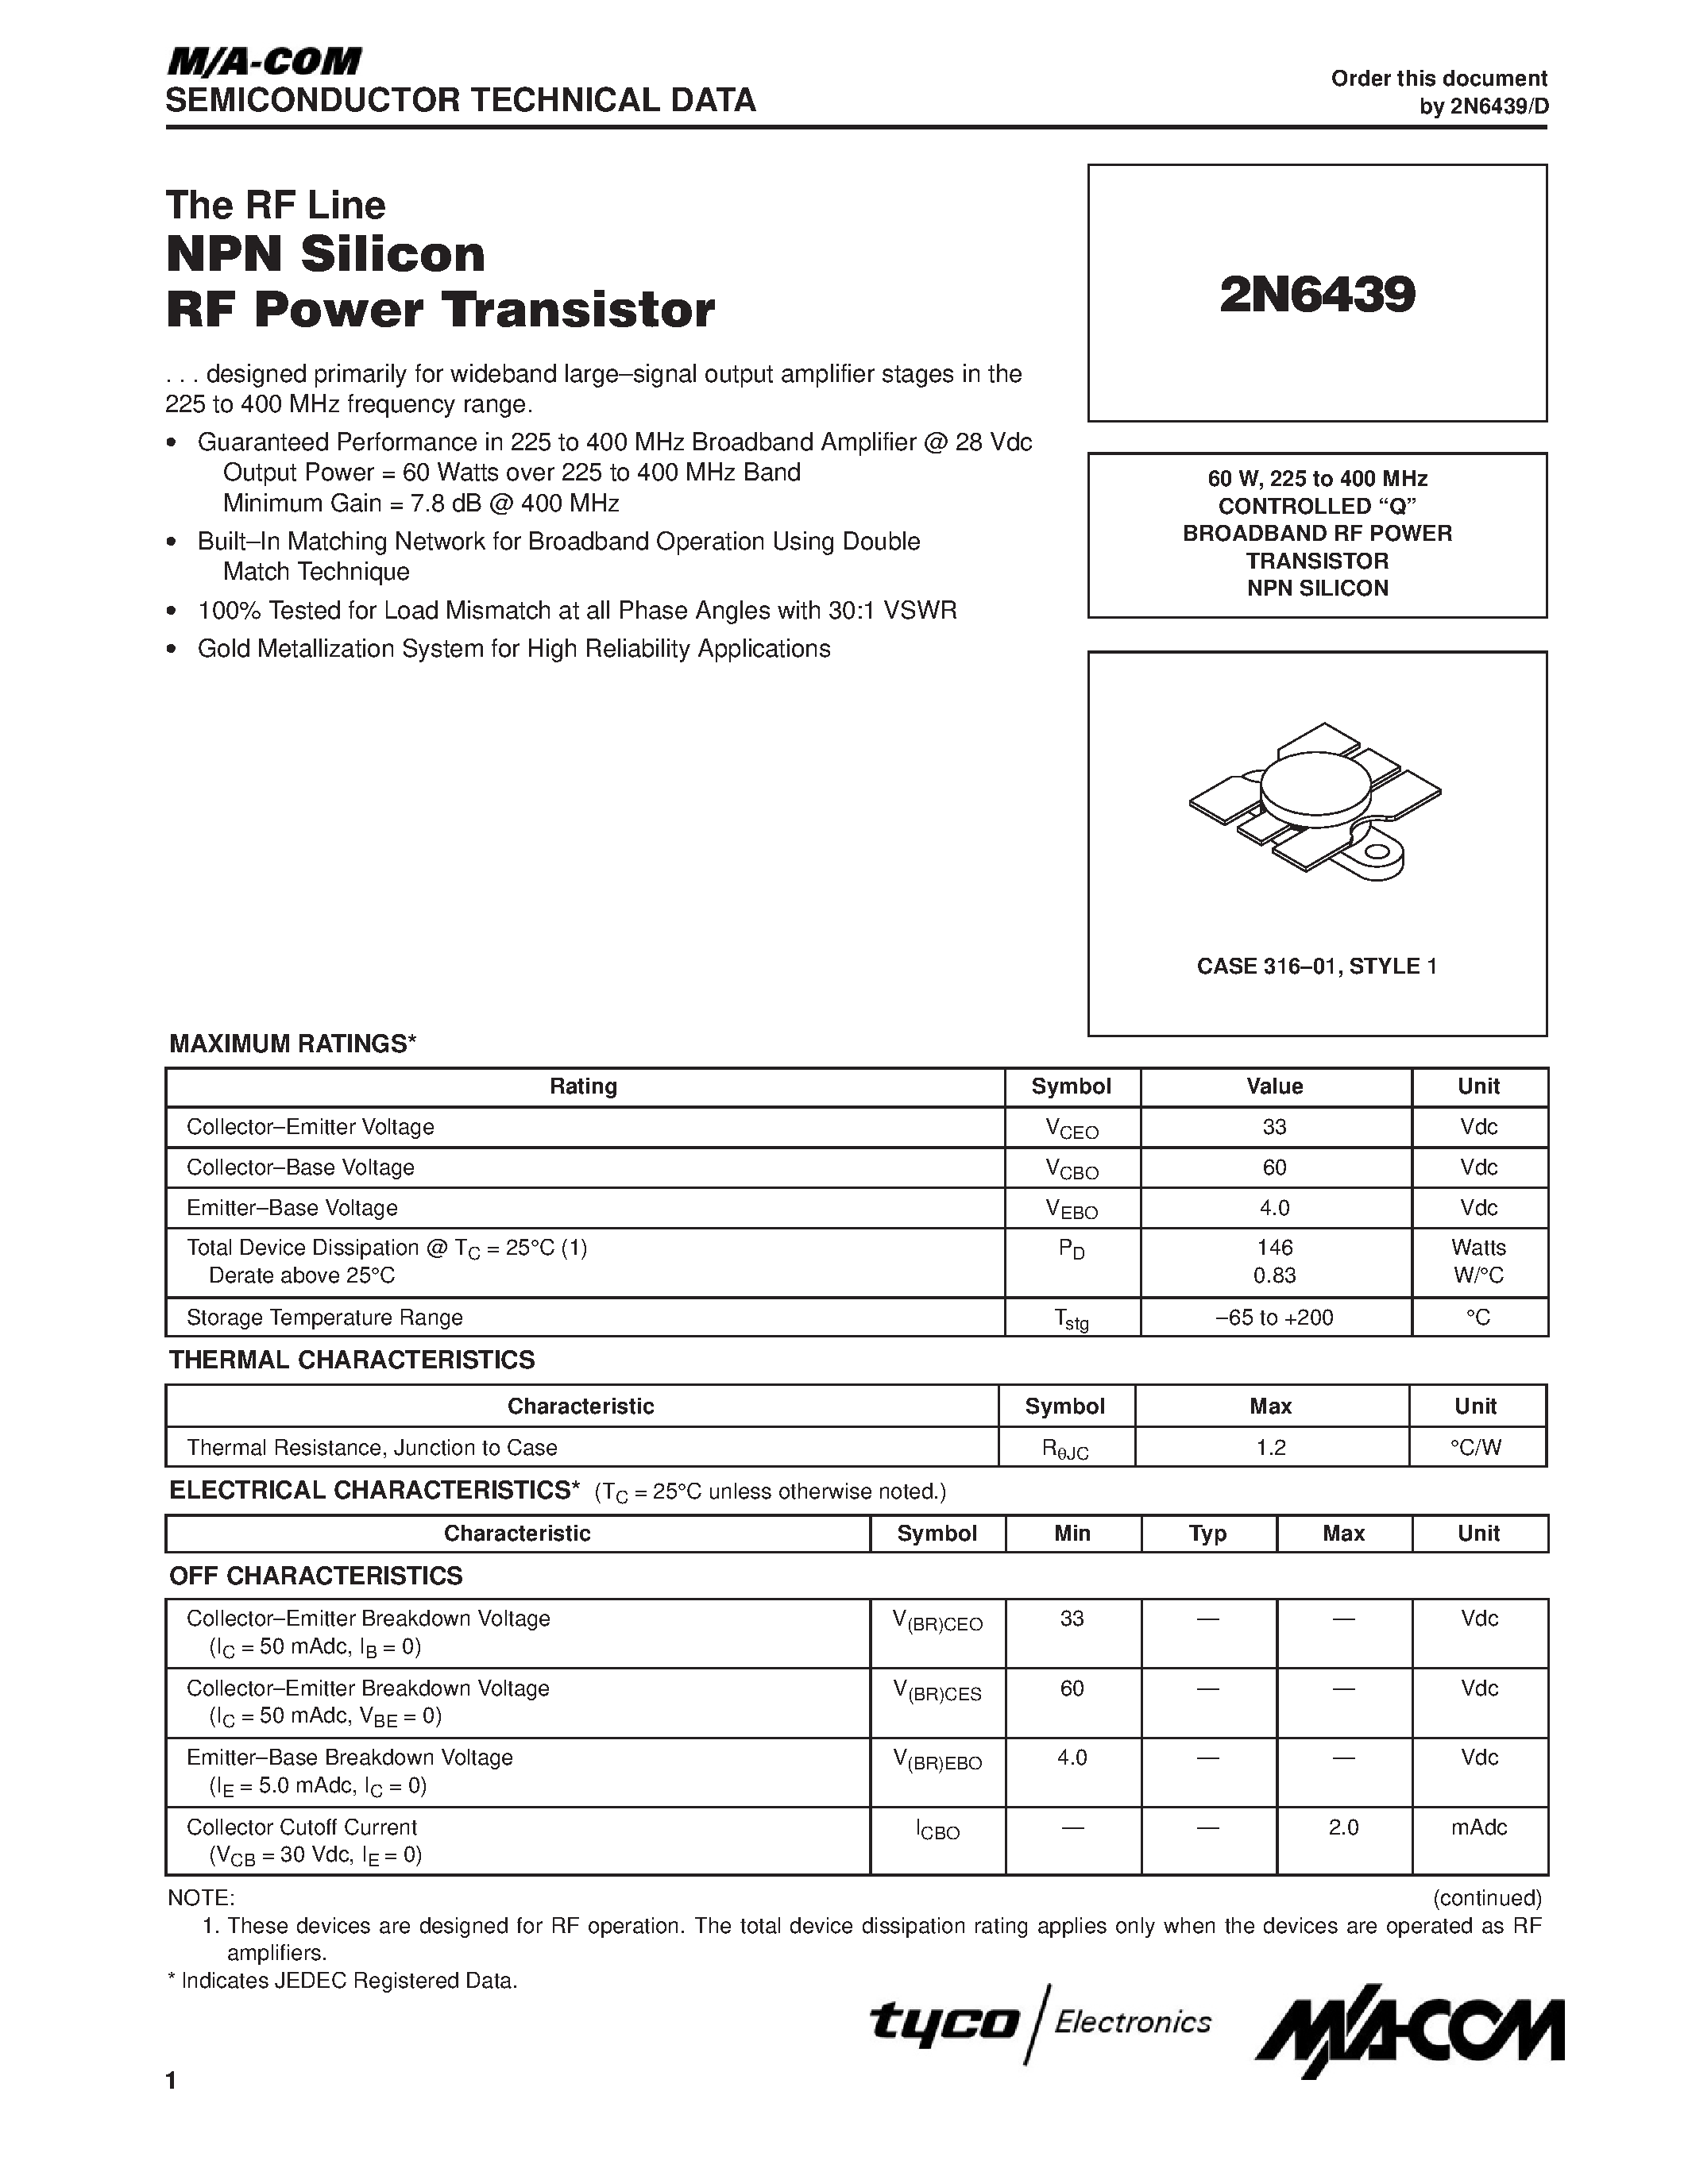 Datasheet M306N0FGTFP - 60 W / 225 to 400 MHz CONTROLLED Q BROADBAND RF POWER TRANSISTOR NPN SILICON page 1